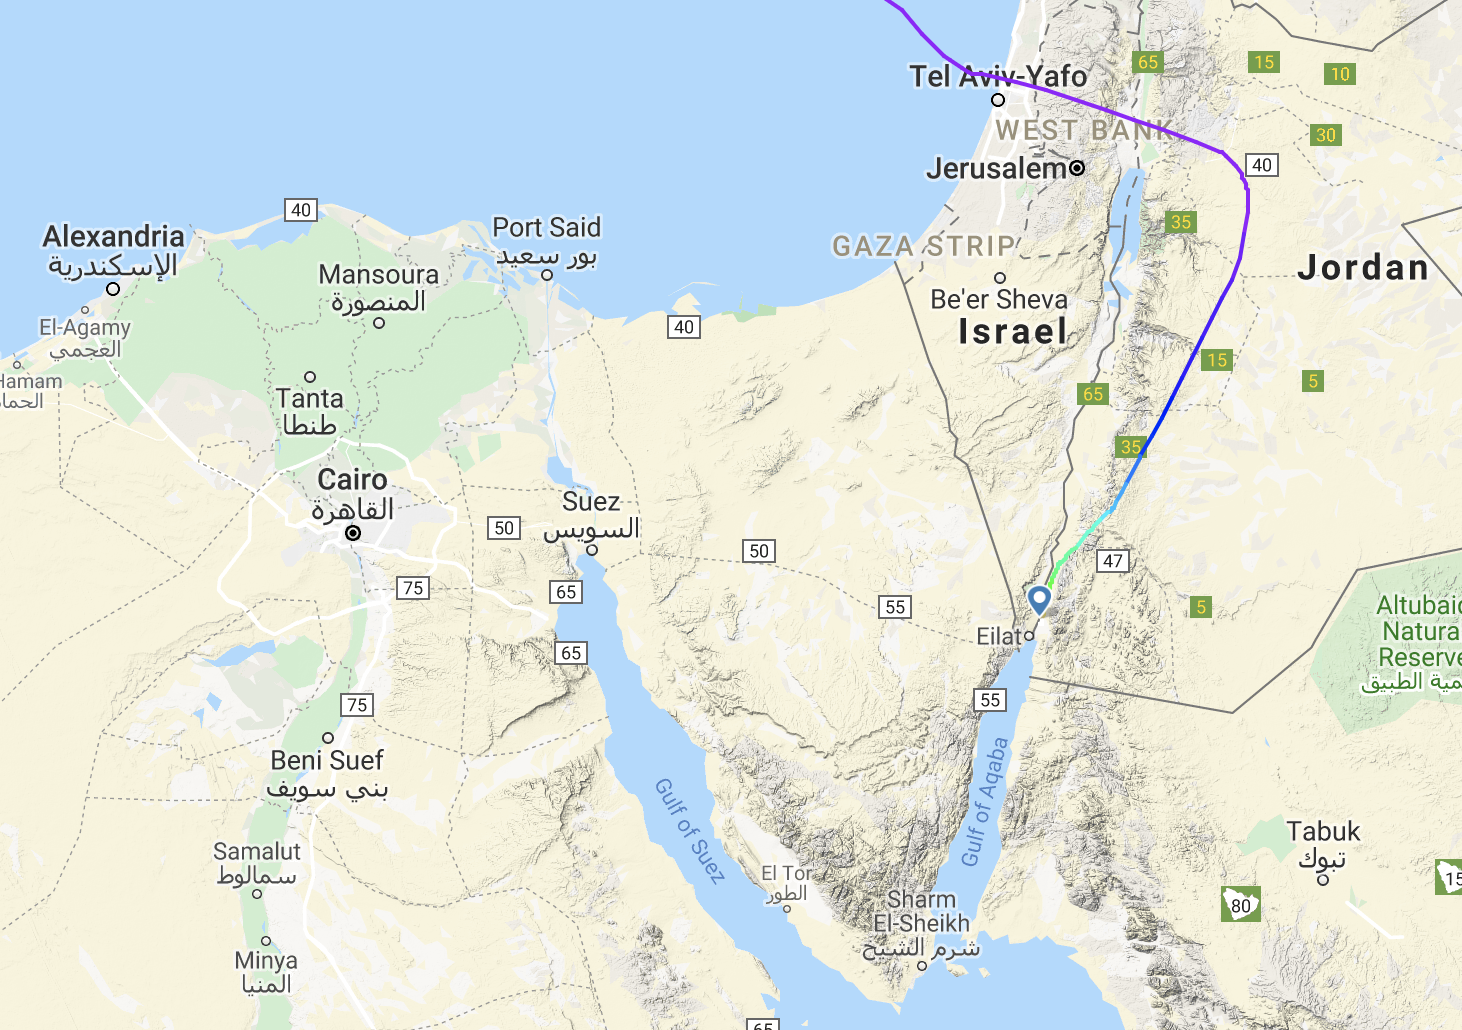 Avoidance technique: the flight path of easyJet's service from Gatwick to Aqaba